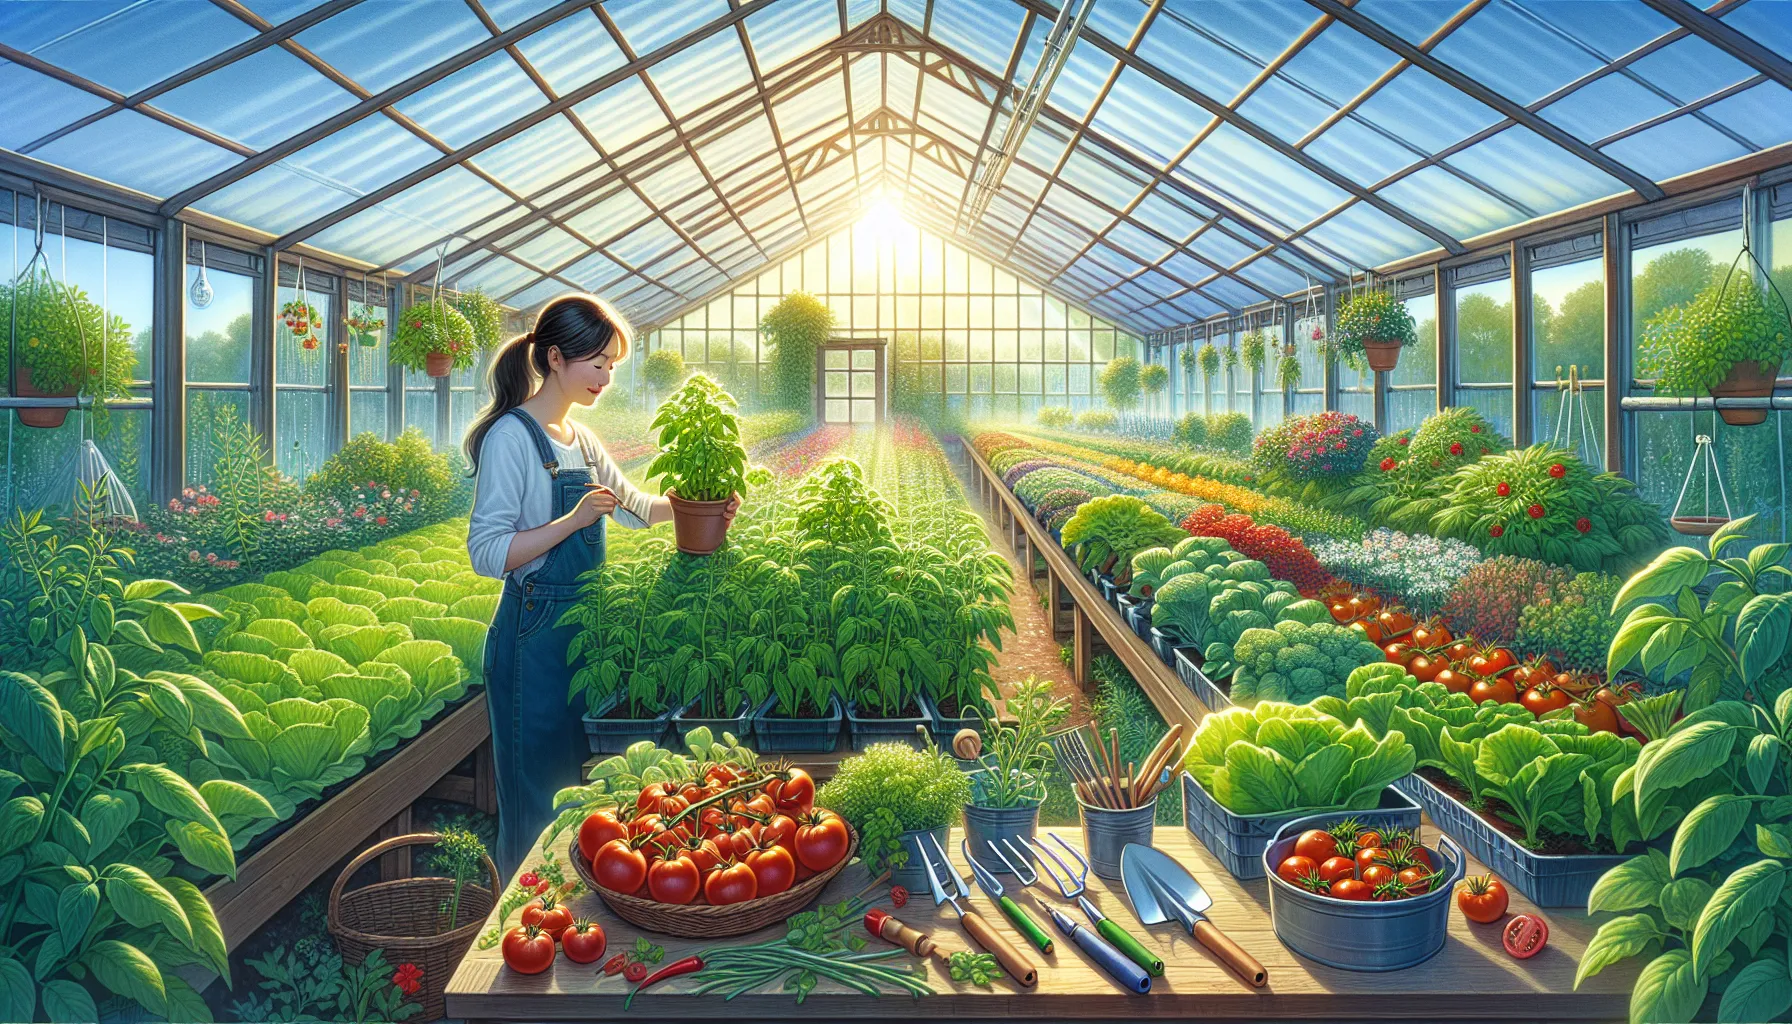 A person tends to plants among lush rows of various vegetables inside a sunlit, sprawling vegetable greenhouse.